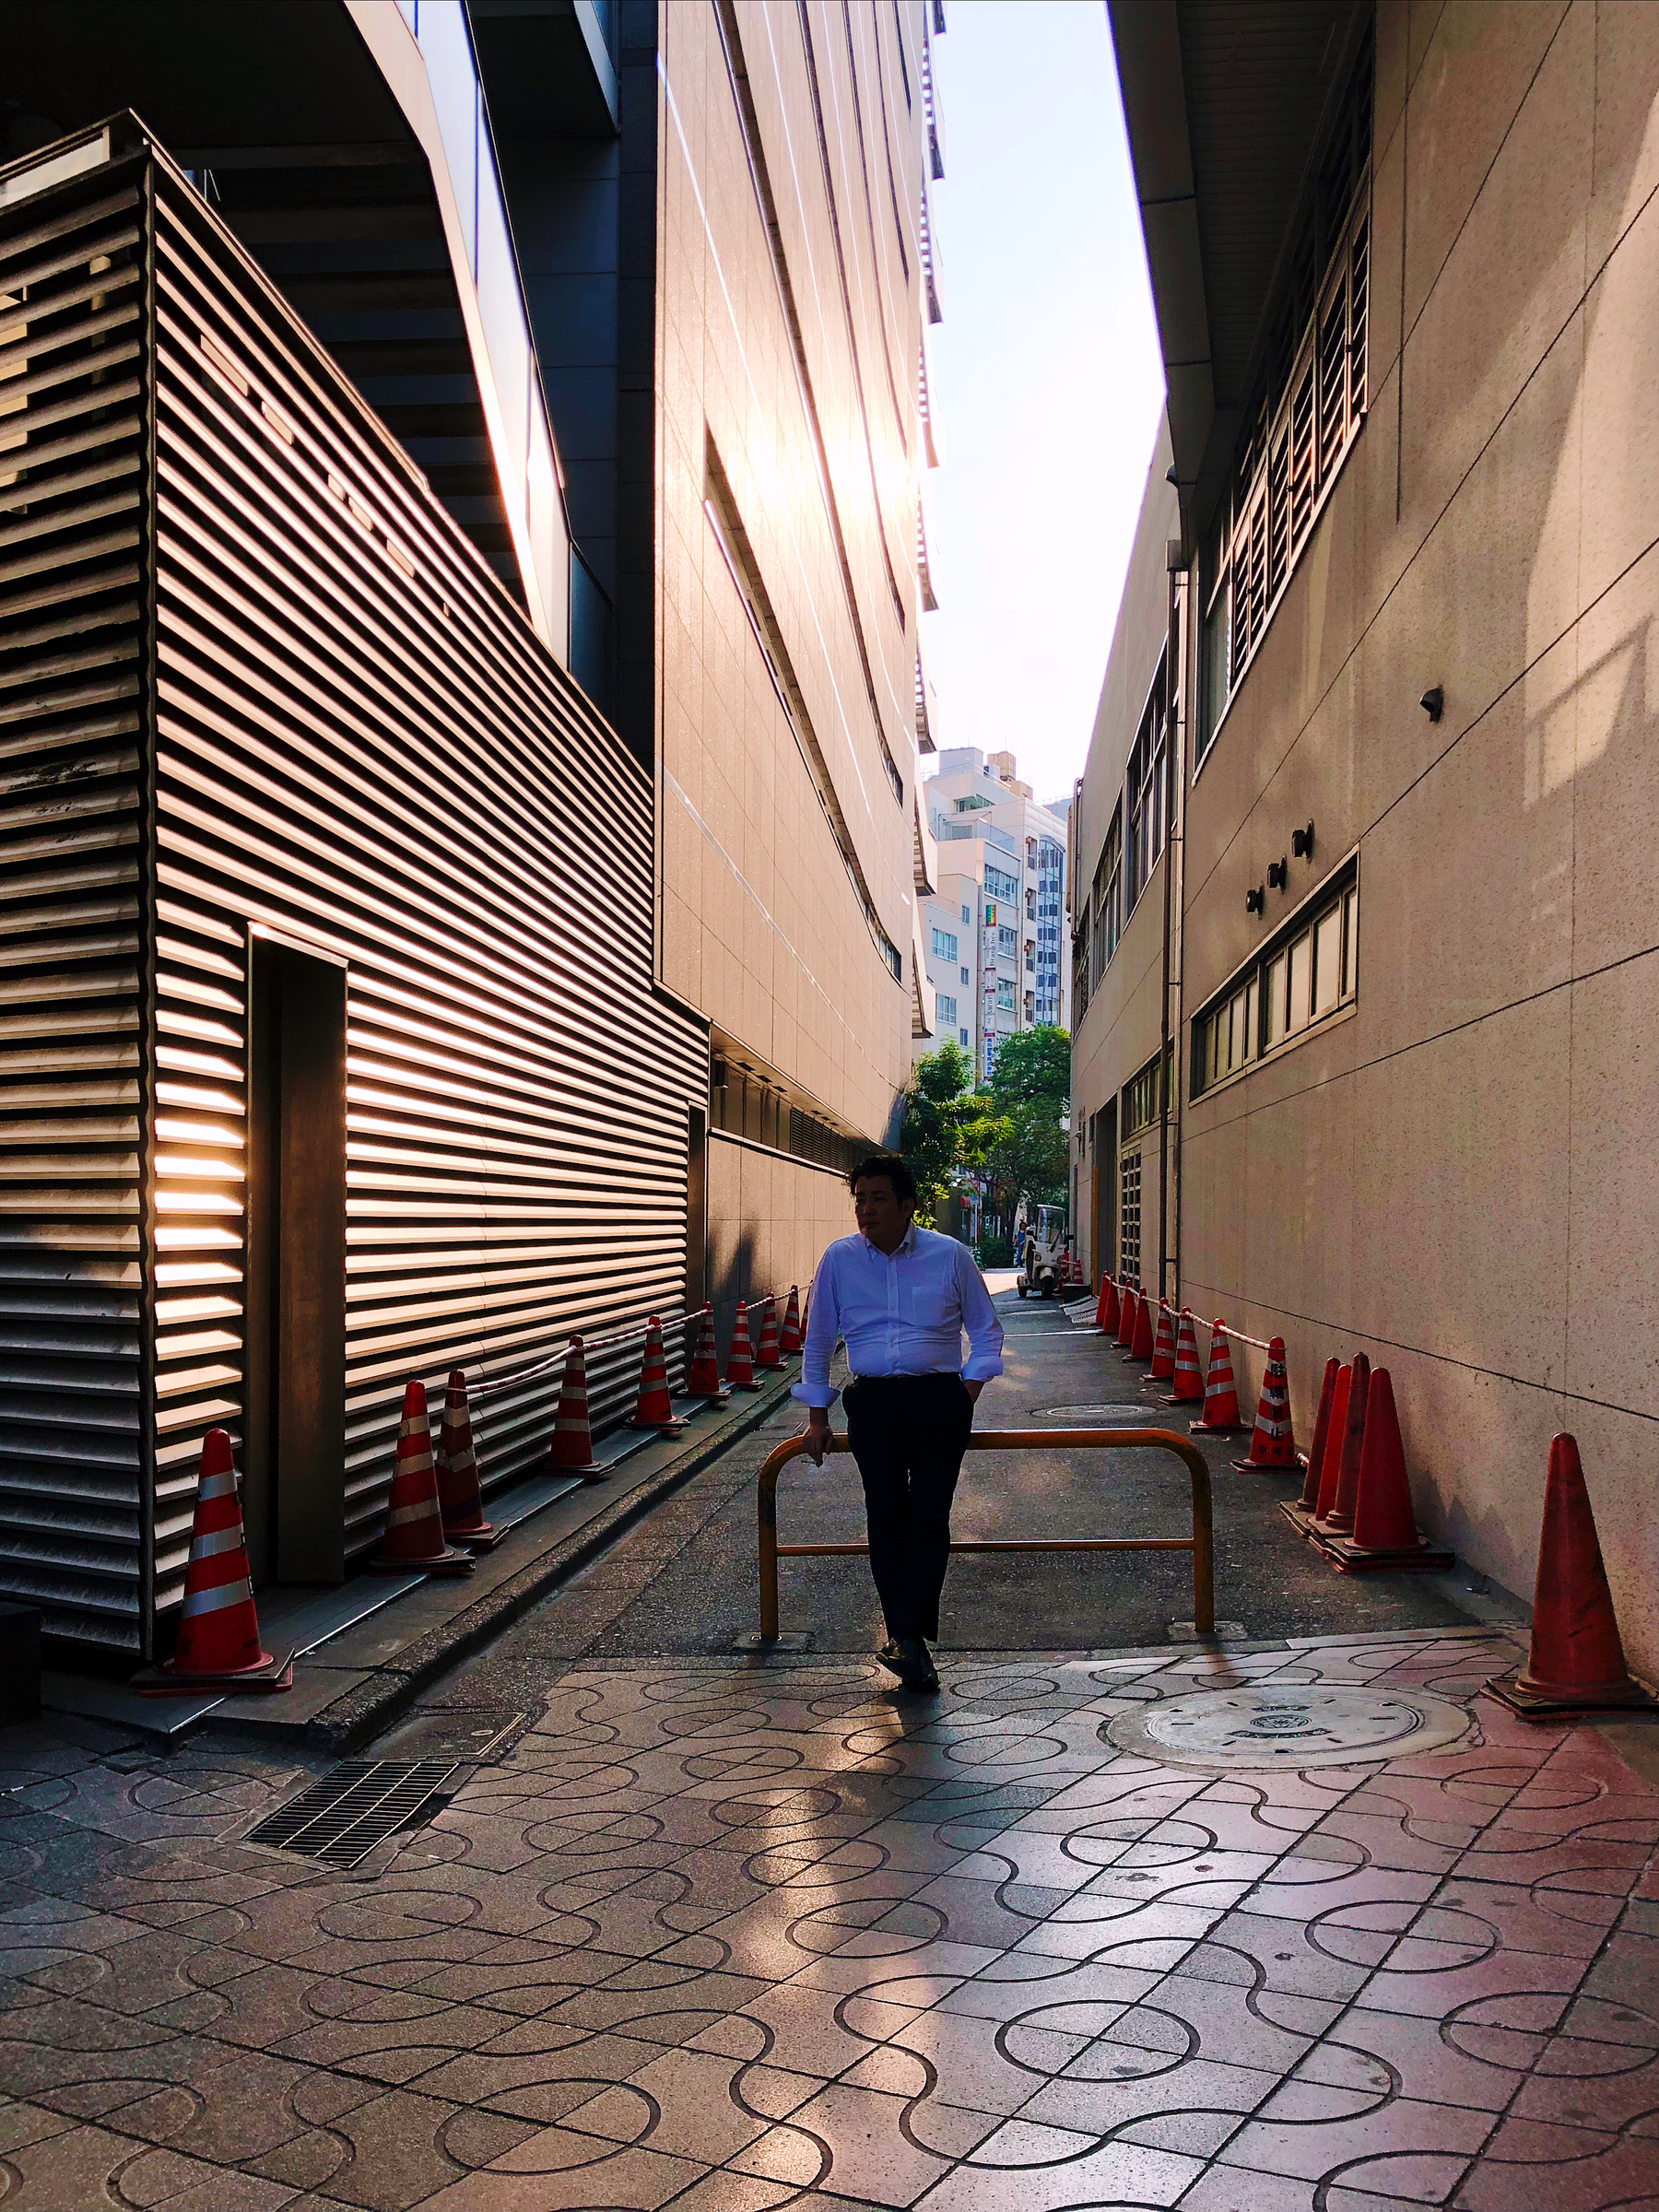 A smoker enjoys a cigarette in a smoking area. Alley, with tall buildings on both sides. 